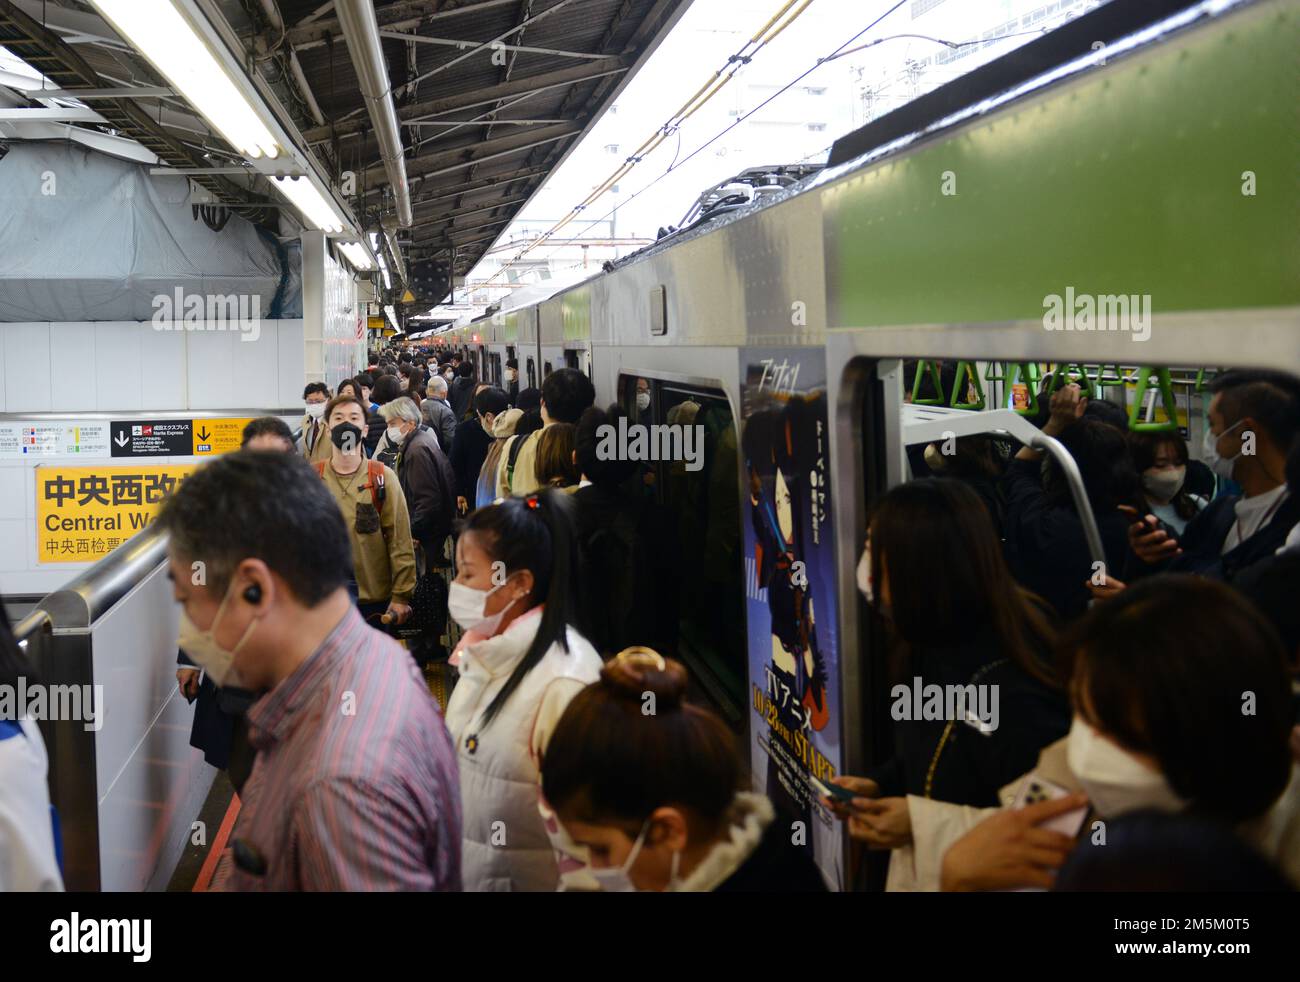 Japanese passengers on the JR Yamanote line in Tokyo, Japan. Stock Photo